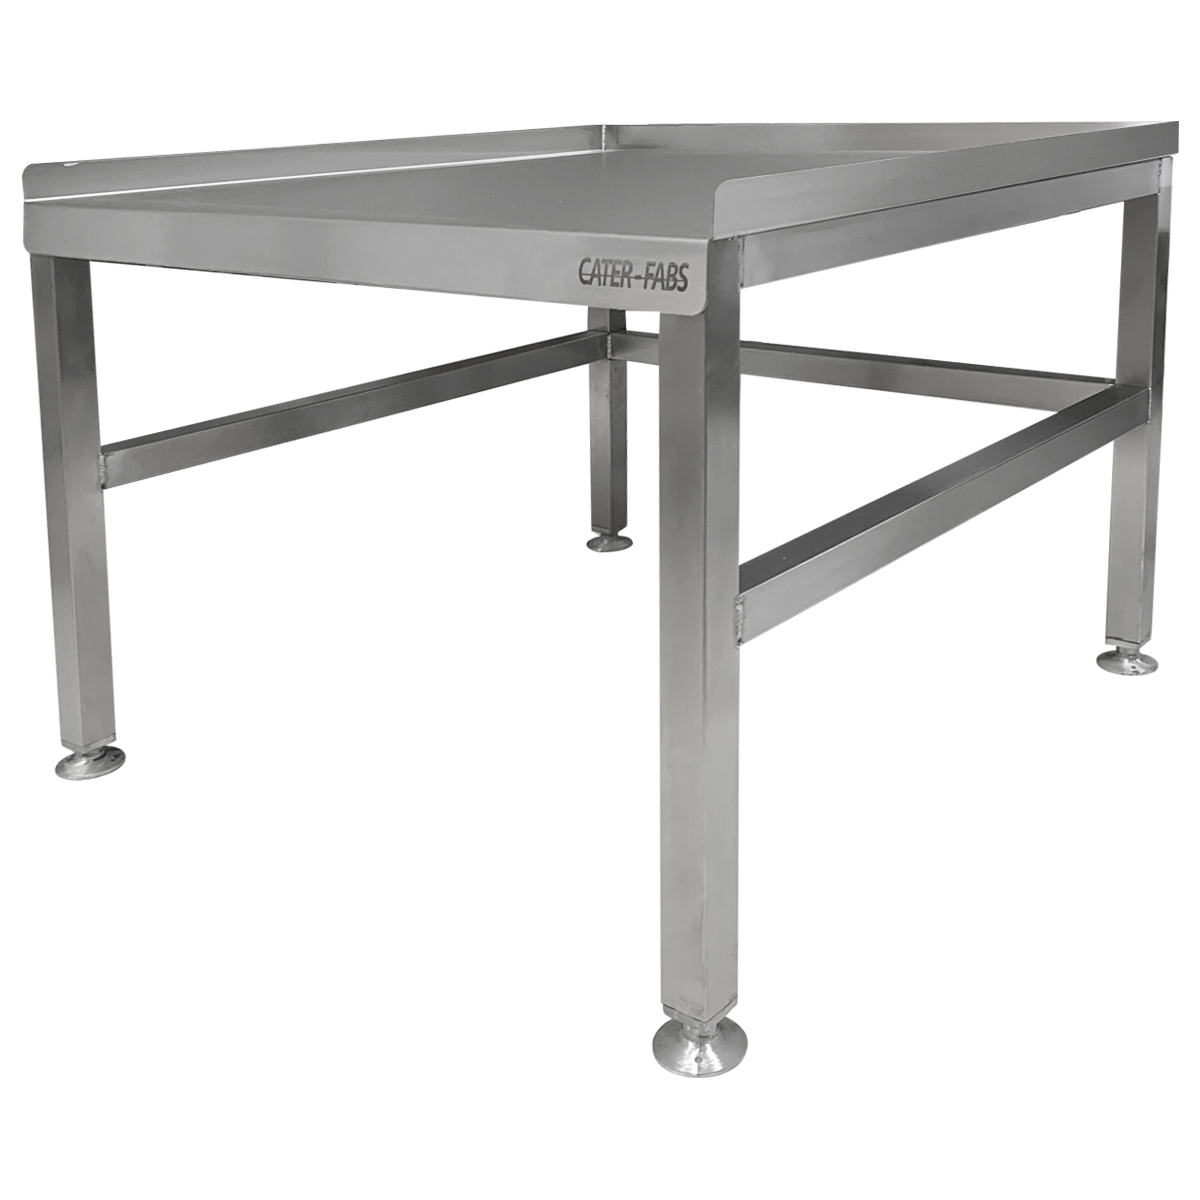 Cater-Fabs Stainless Steel Equipment Stand W485 x D610 x H540mm - CFST400